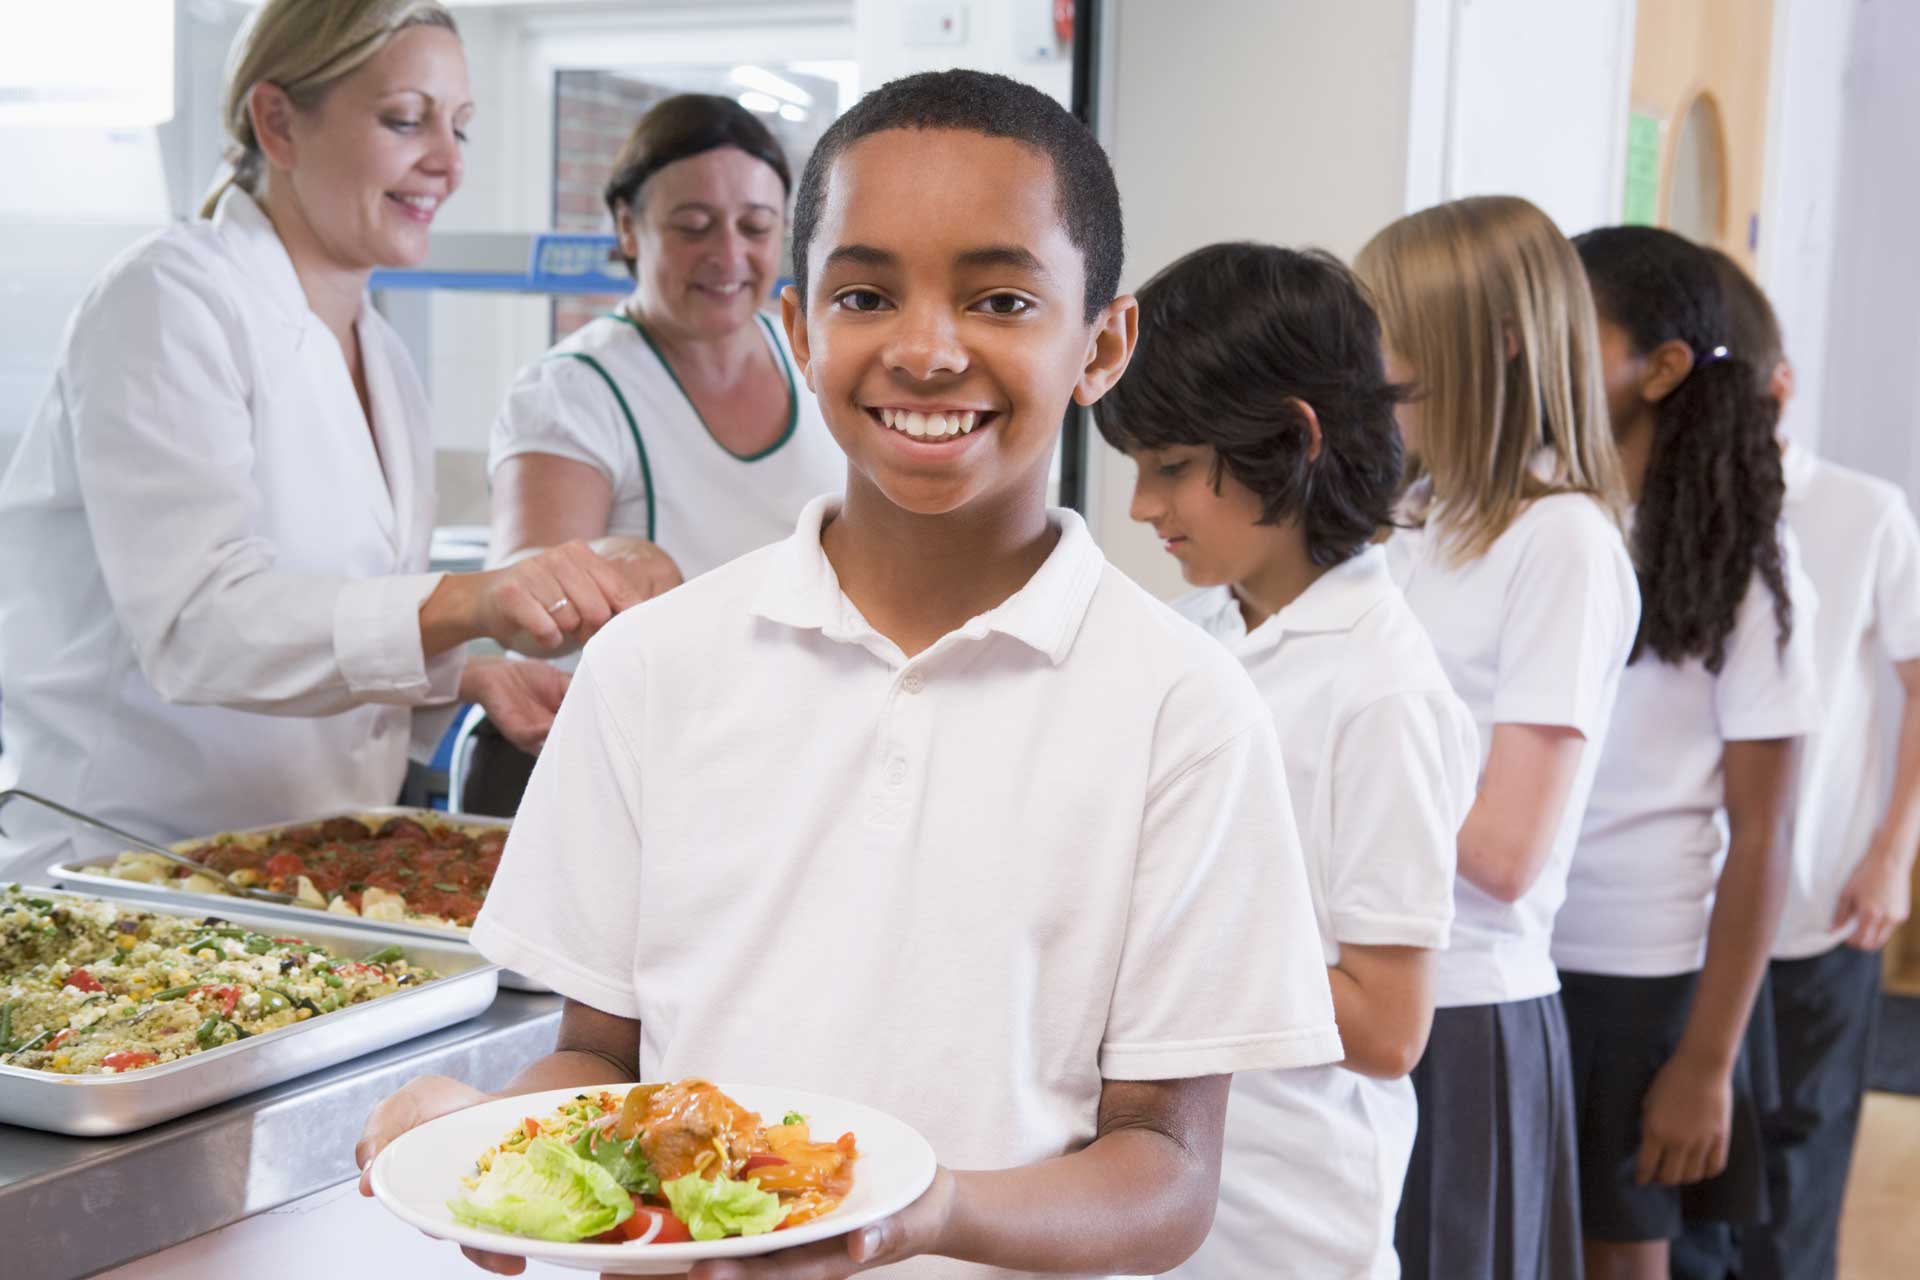 How much of the $1.5 Billion School Meal Program Funding will NY See?